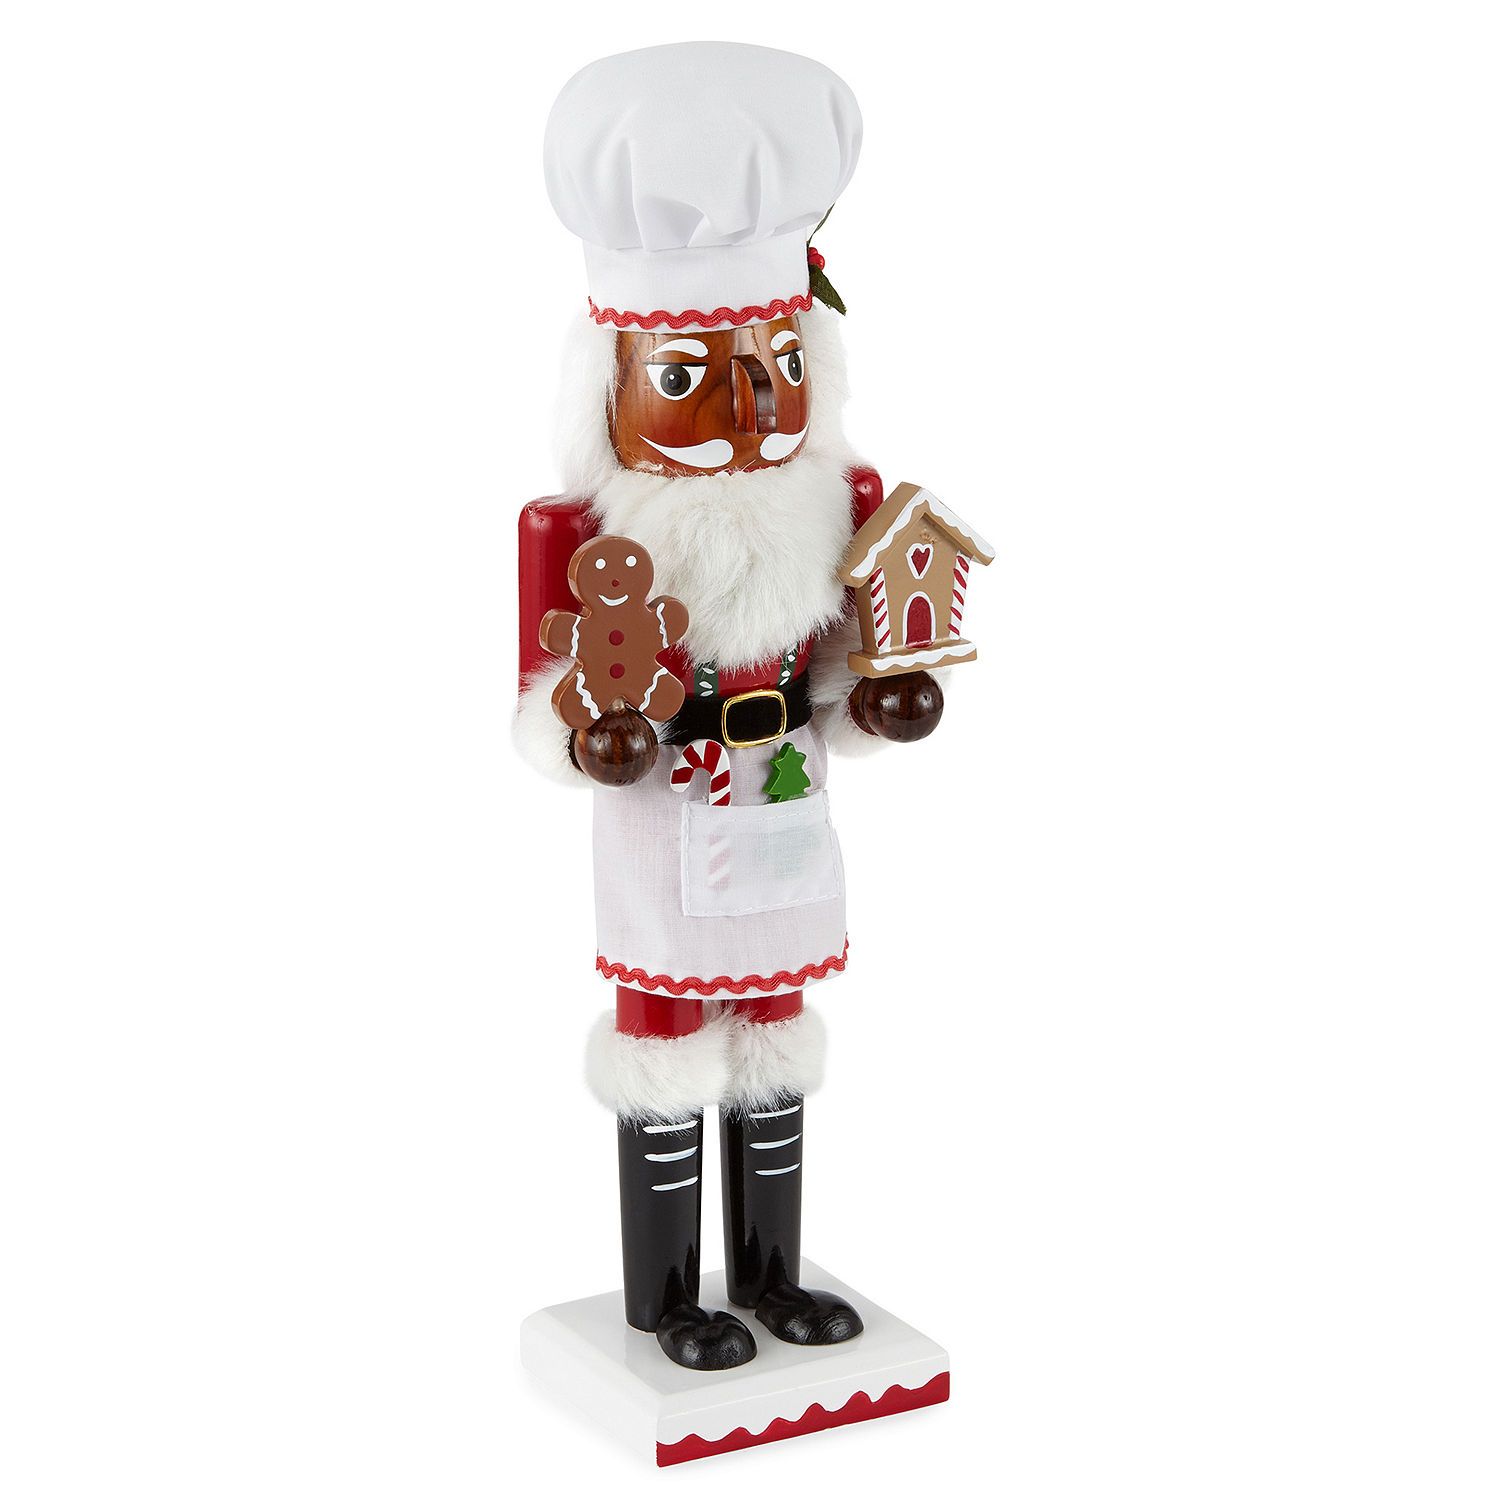 North Pole Trading Co. 14" African American Baker Christmas Nutcracker | JCPenney